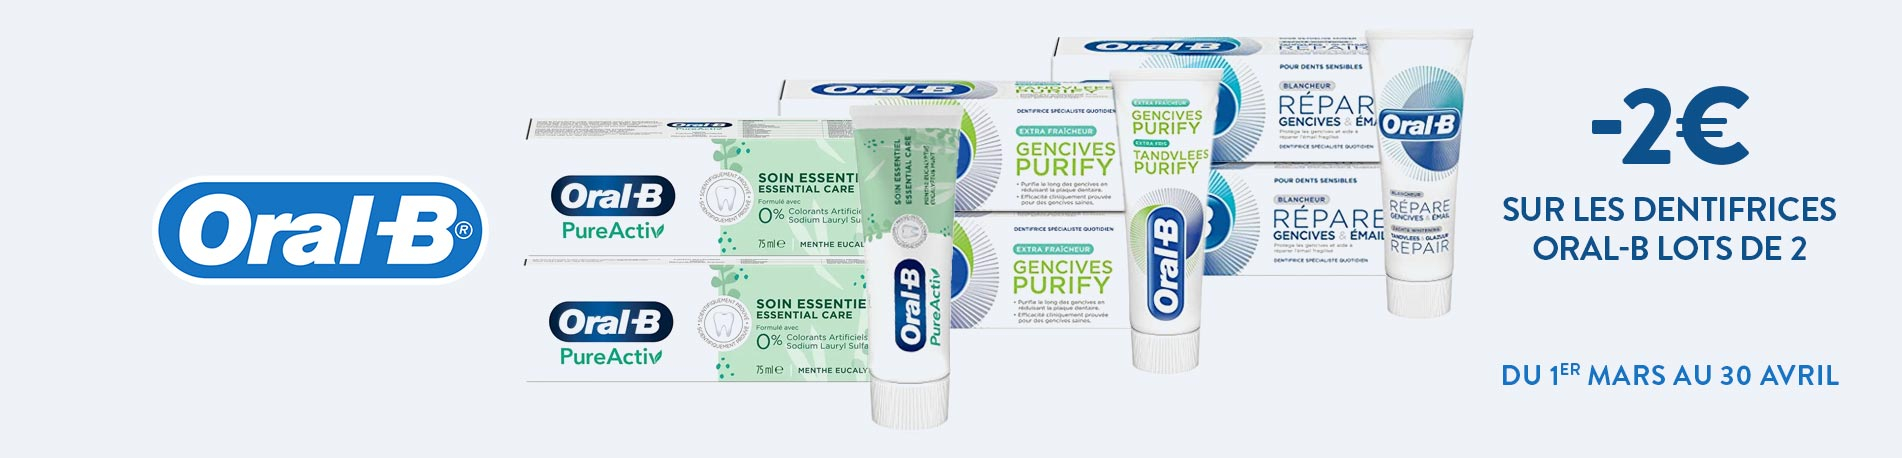 Promotion Oral-b dentifrices